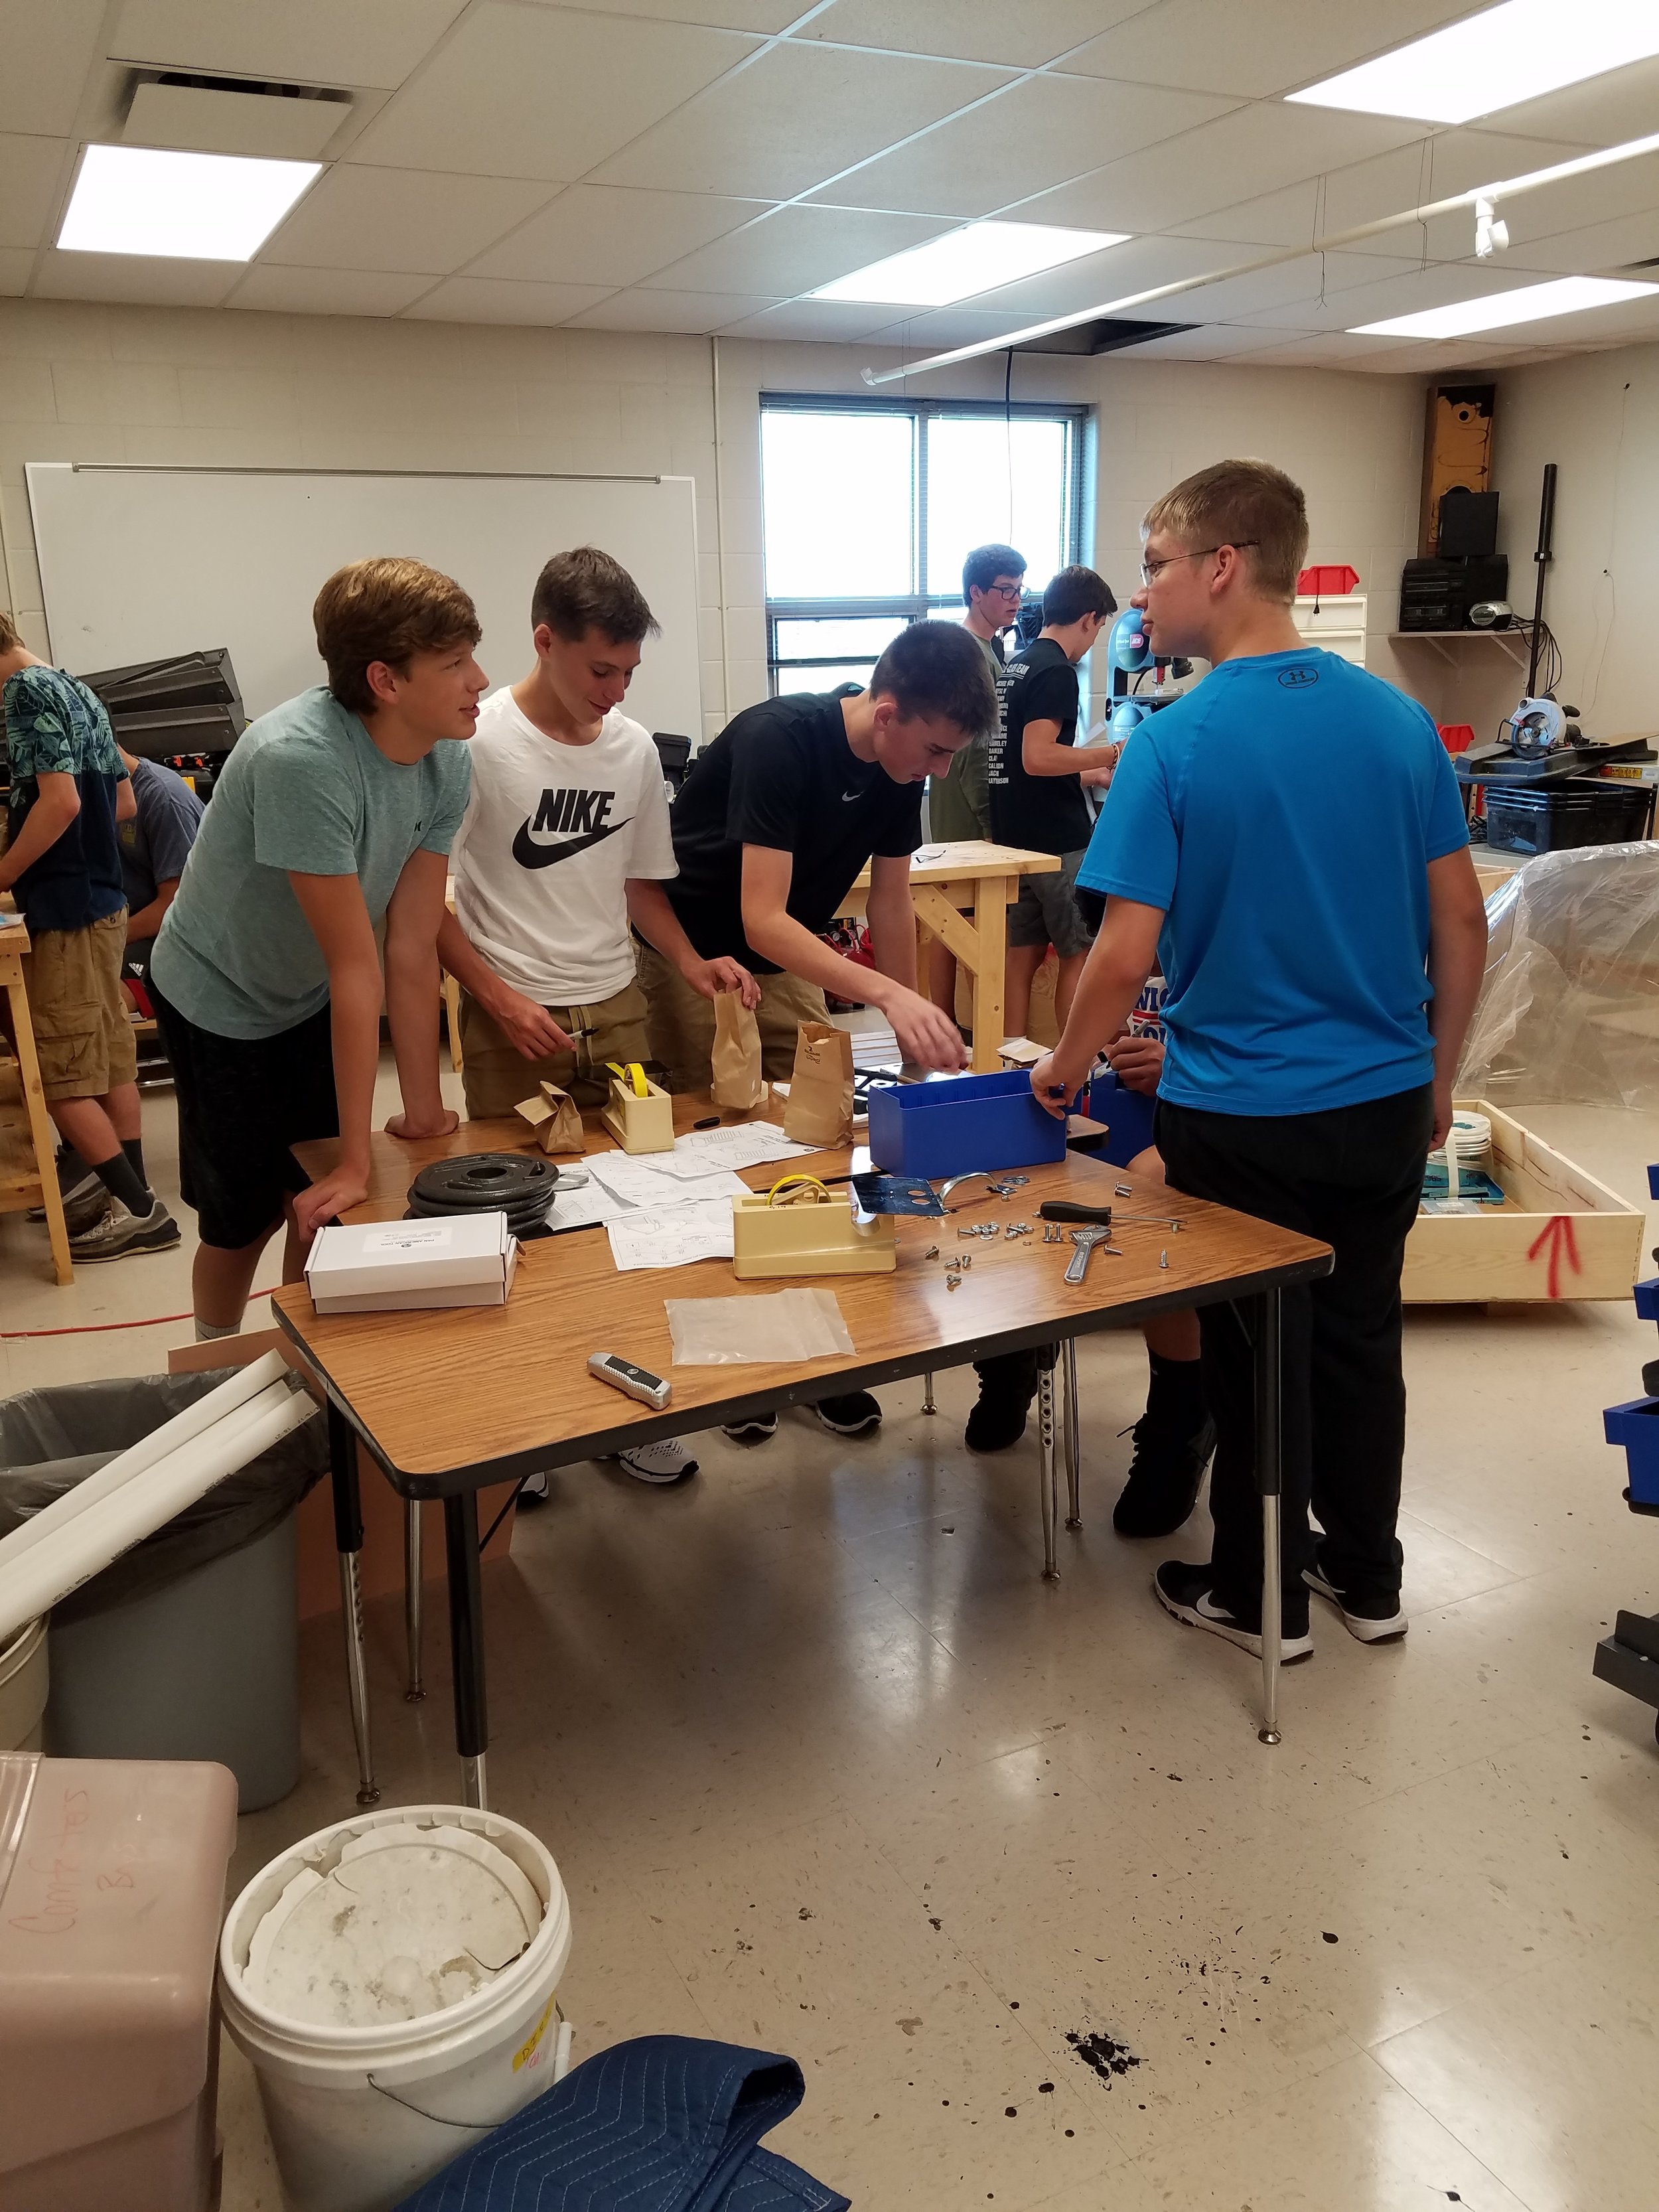 Students work together on engineering project.